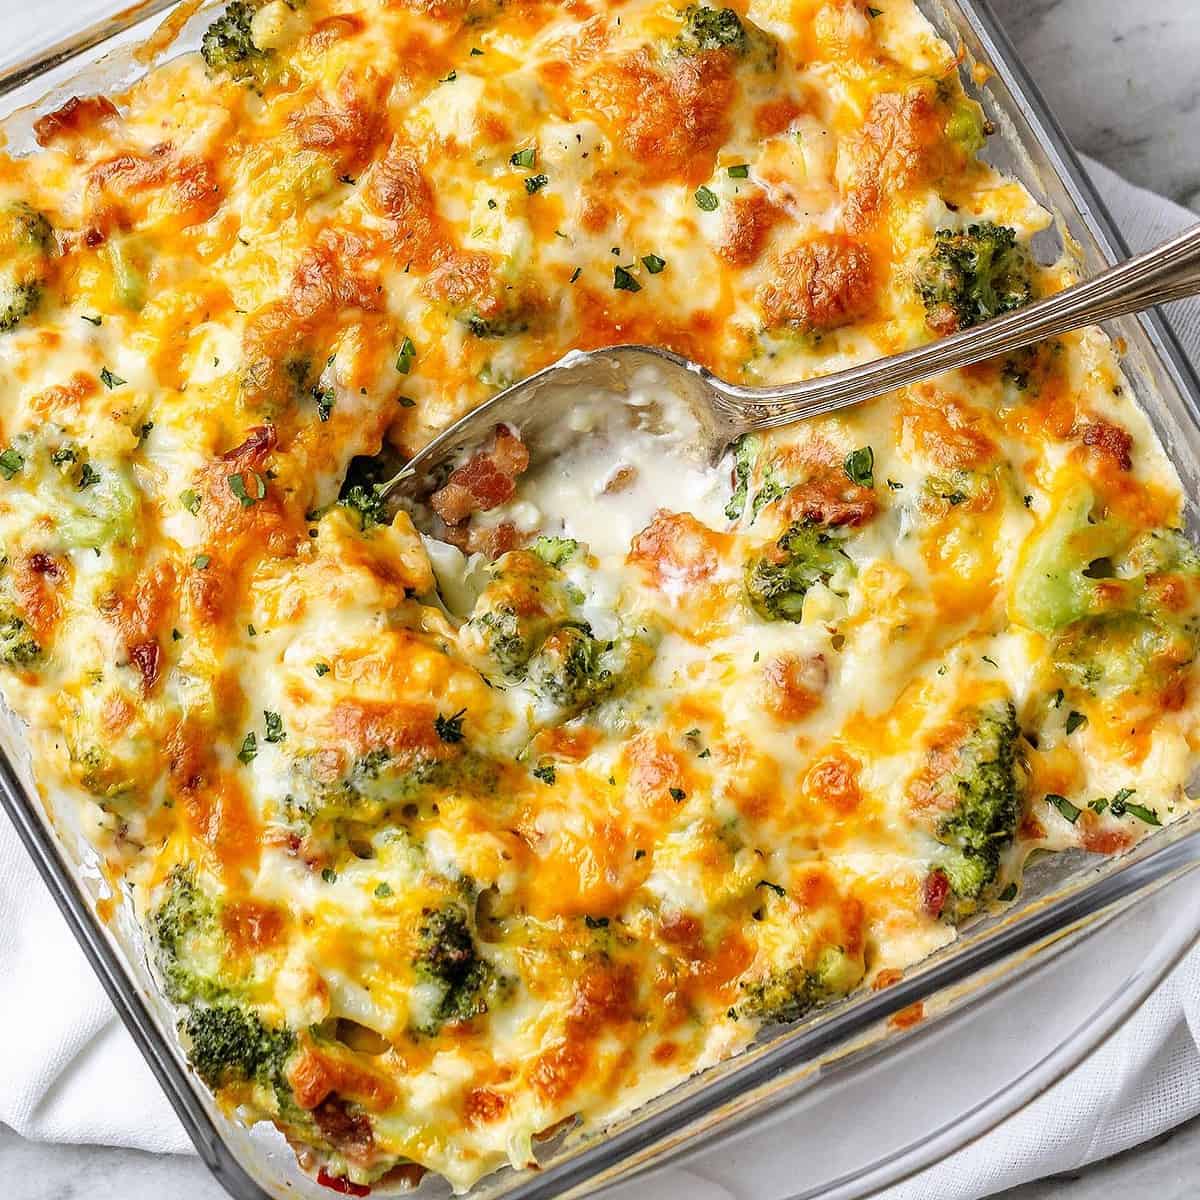  Nutritious and delicious with every bite, this vegan broccoli and cauliflower casserole is the perfect weekday meal.